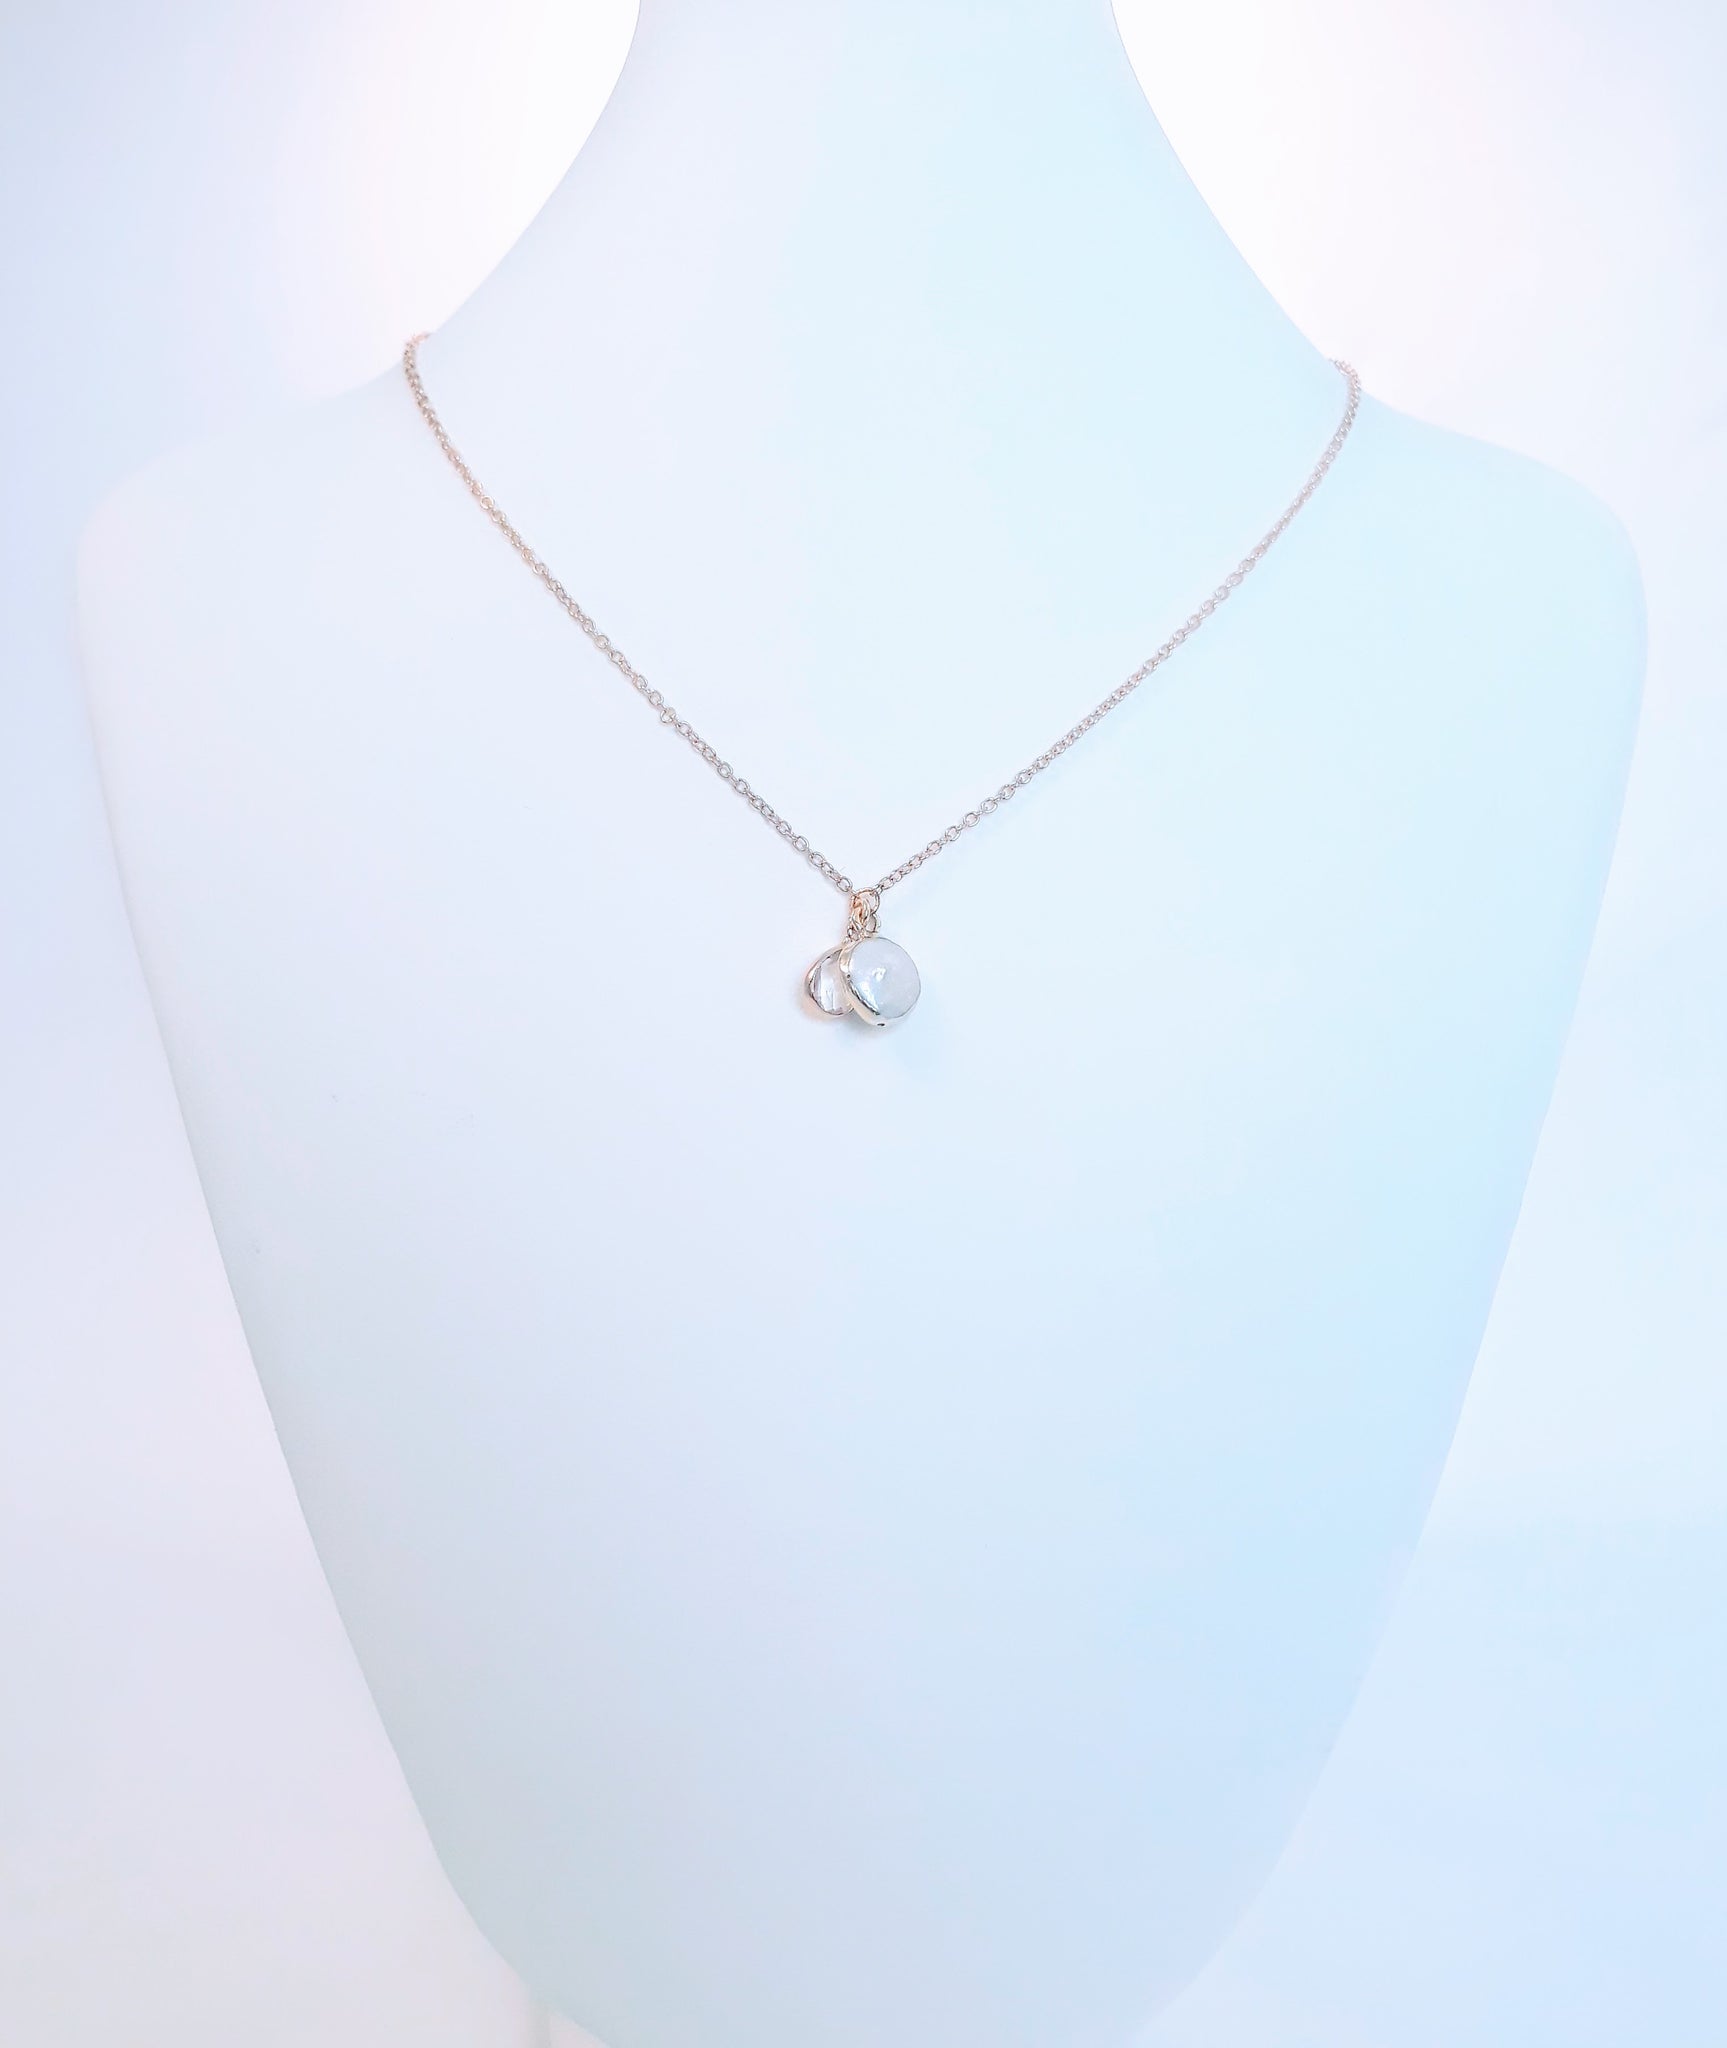 The Dainty Pearl Pendant